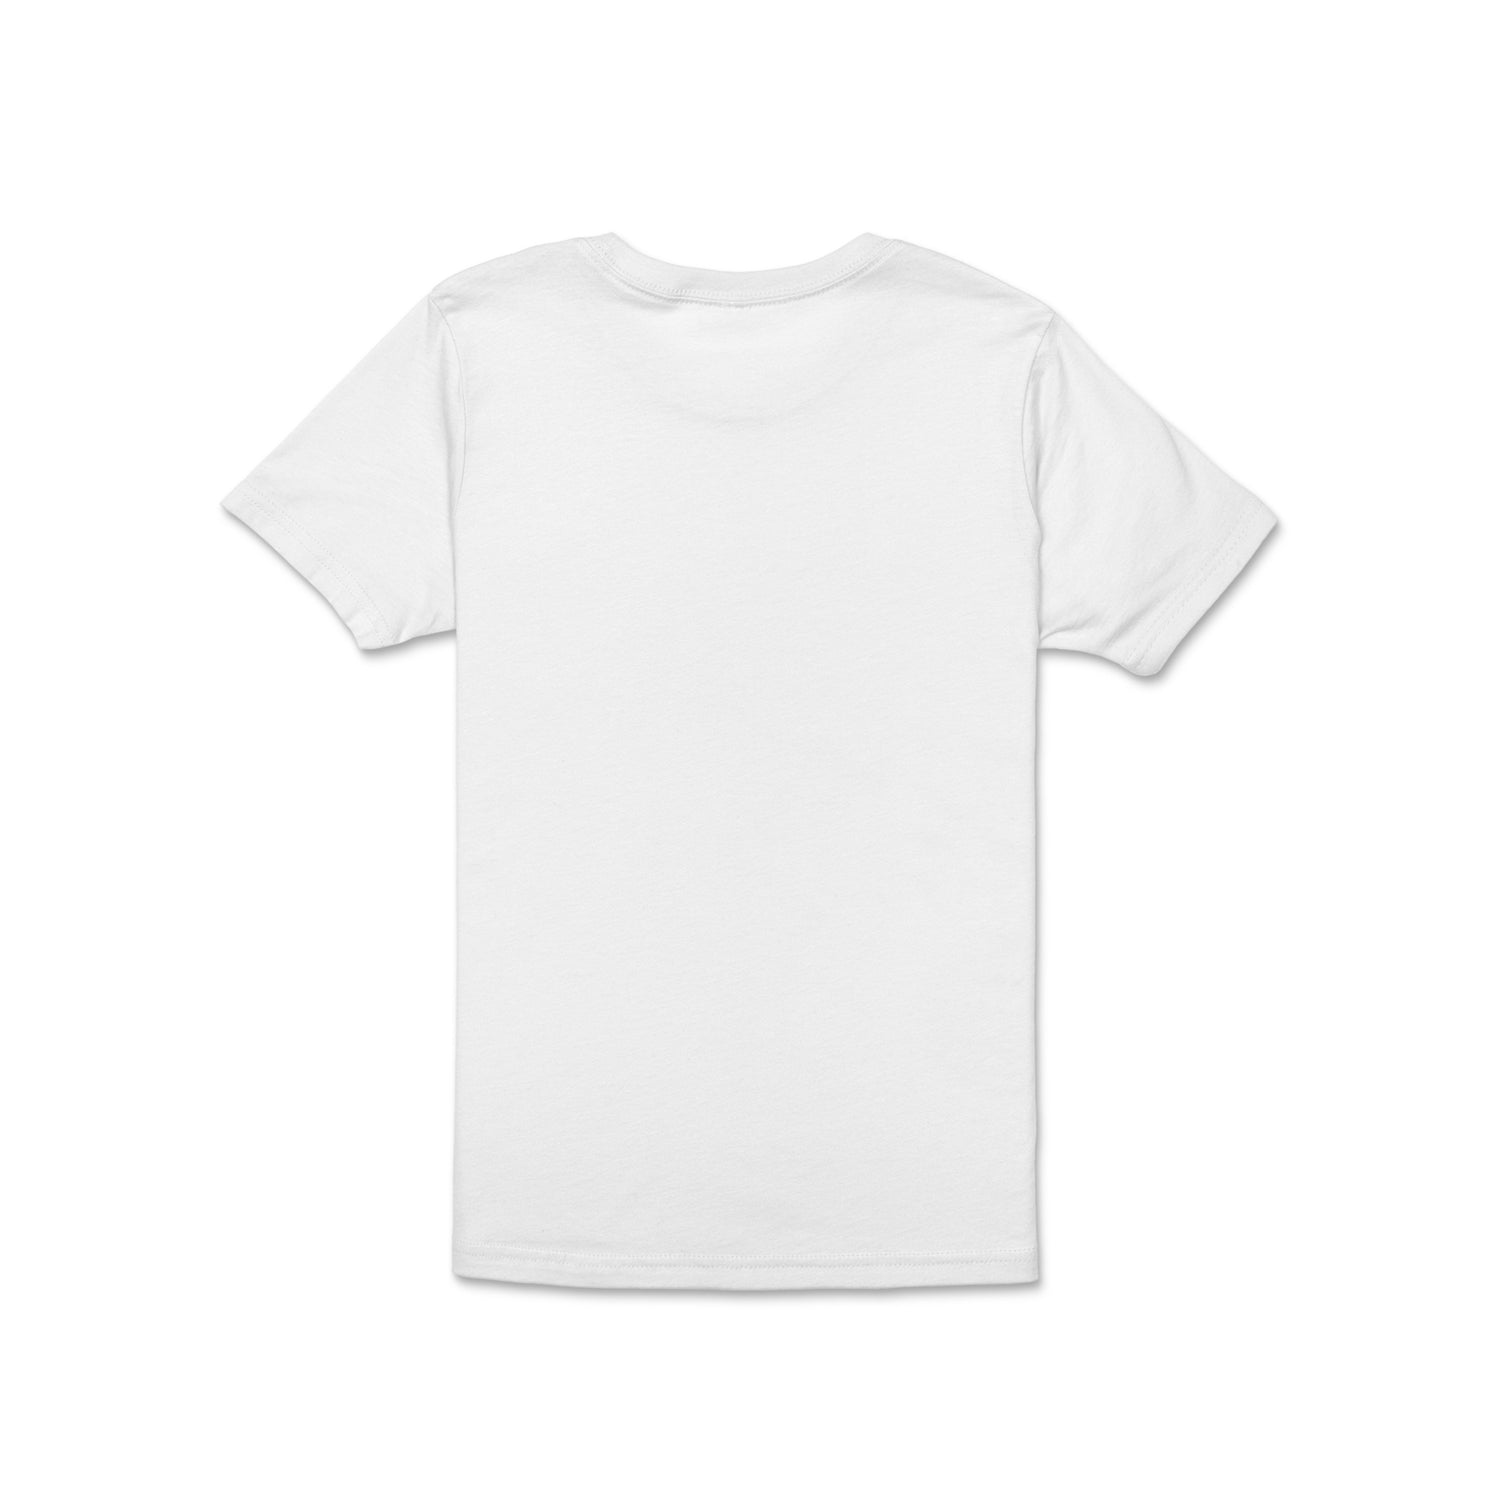 Youth 100% Cotton T